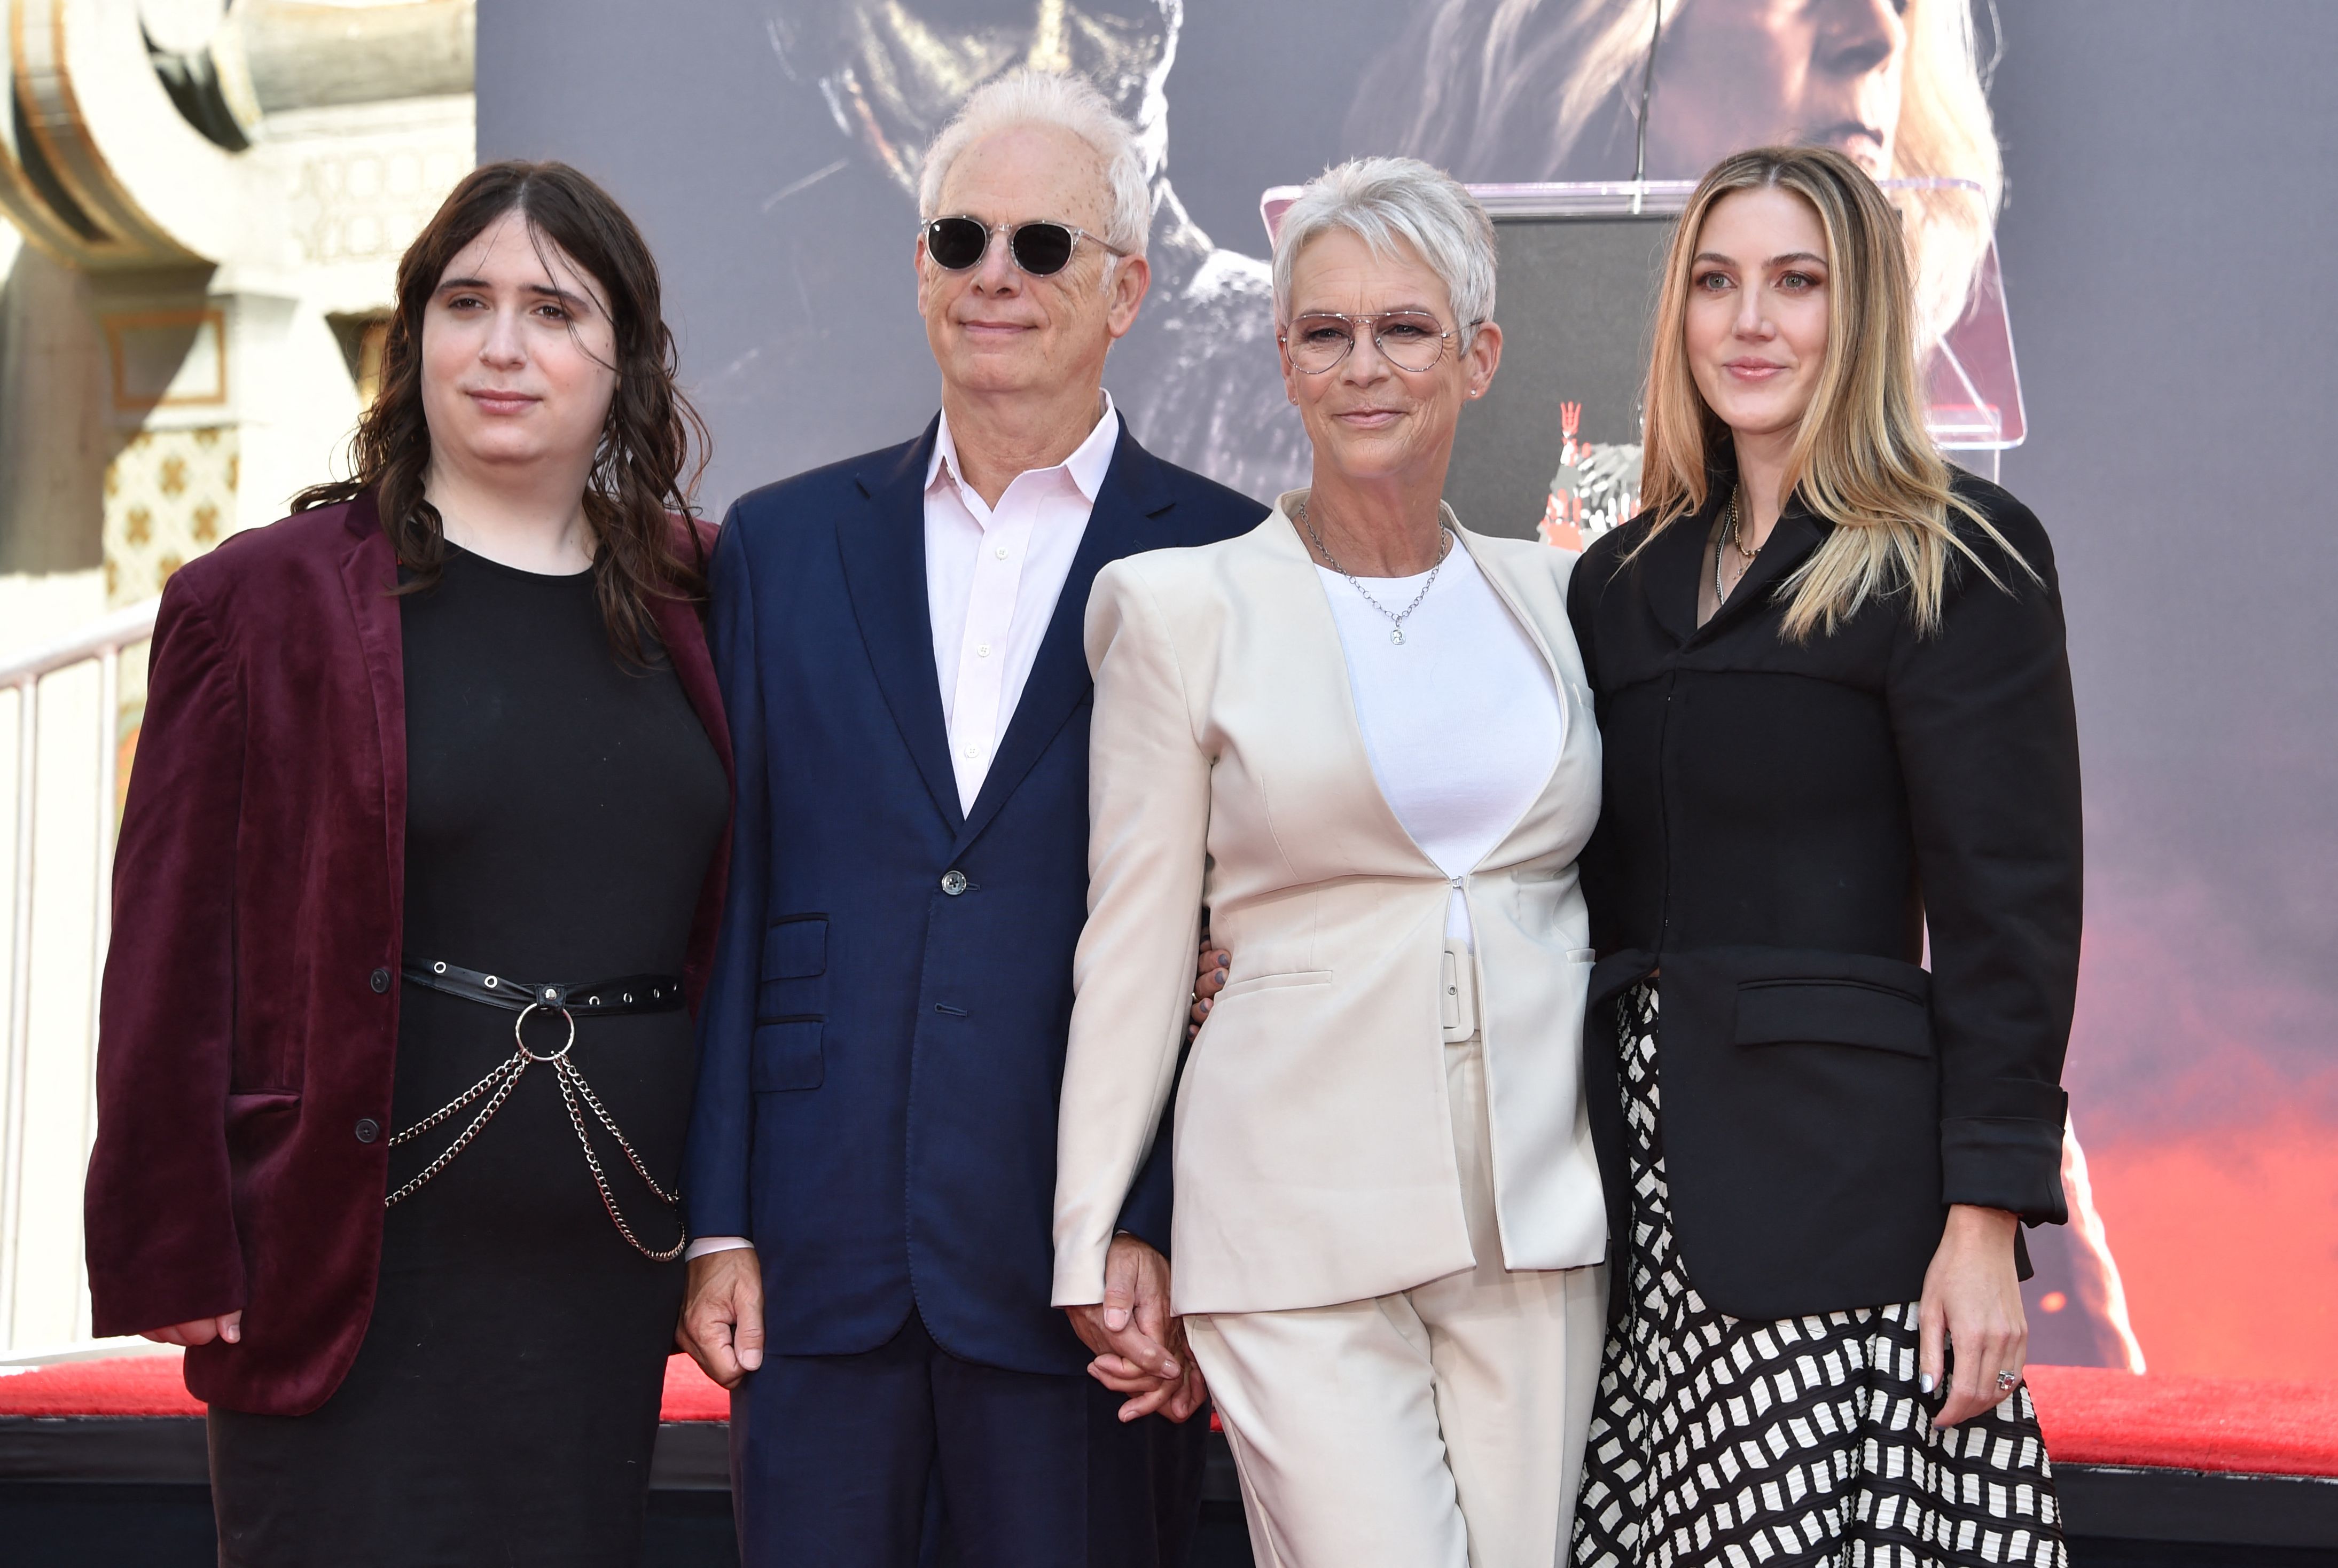 Ruby Guest, Christopher Guest, Jamie Lee Curtis and Annie Guest in the courtyard of the TCL Chinese theatre in Hollywood, California, on October 12, 2022 | Source: Getty Images